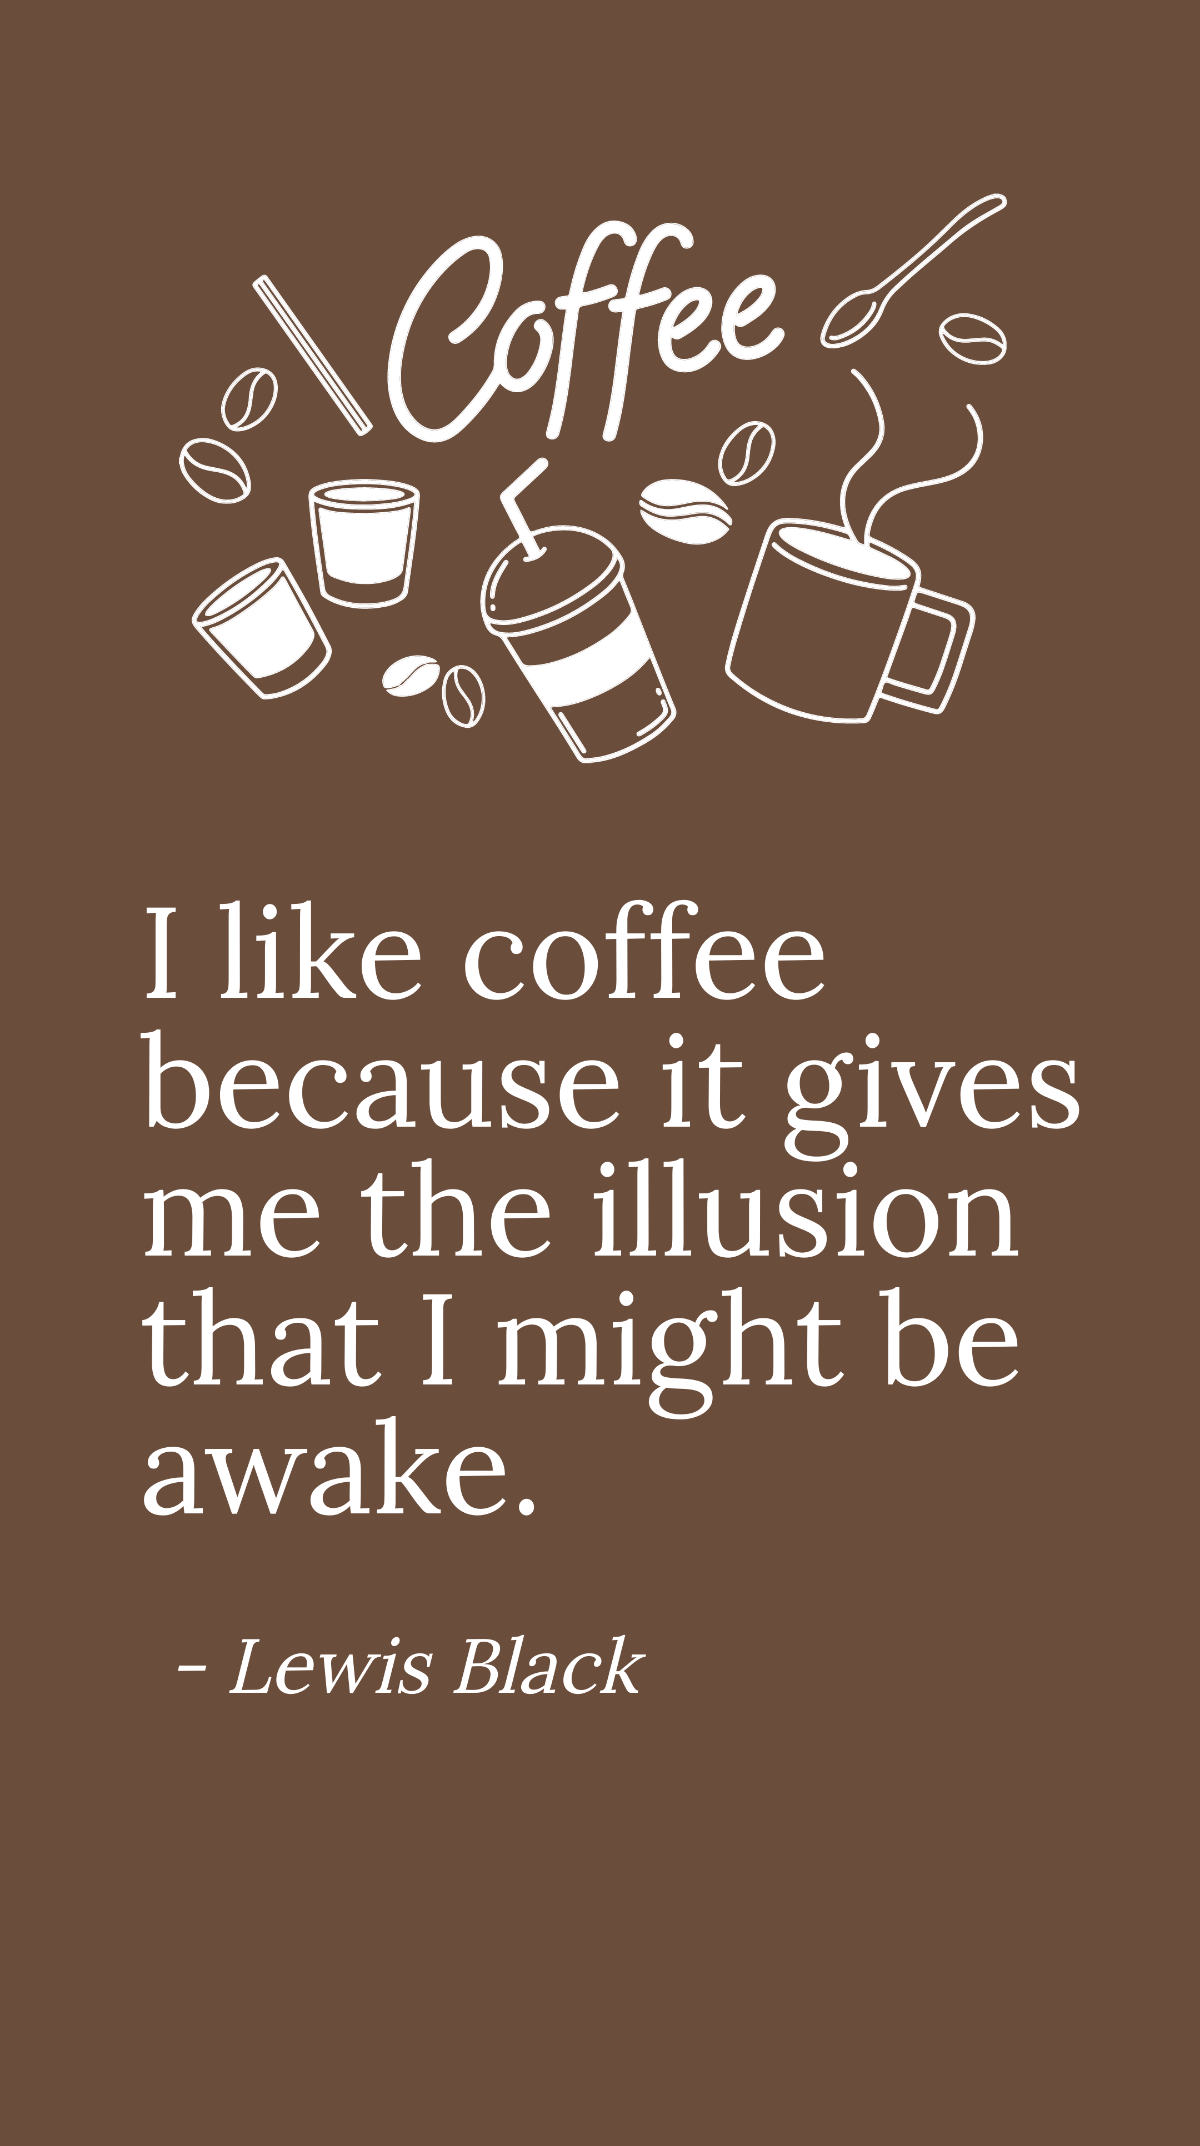 Free Lewis Black- I like coffee because it gives me the illusion that I might be awake. Template